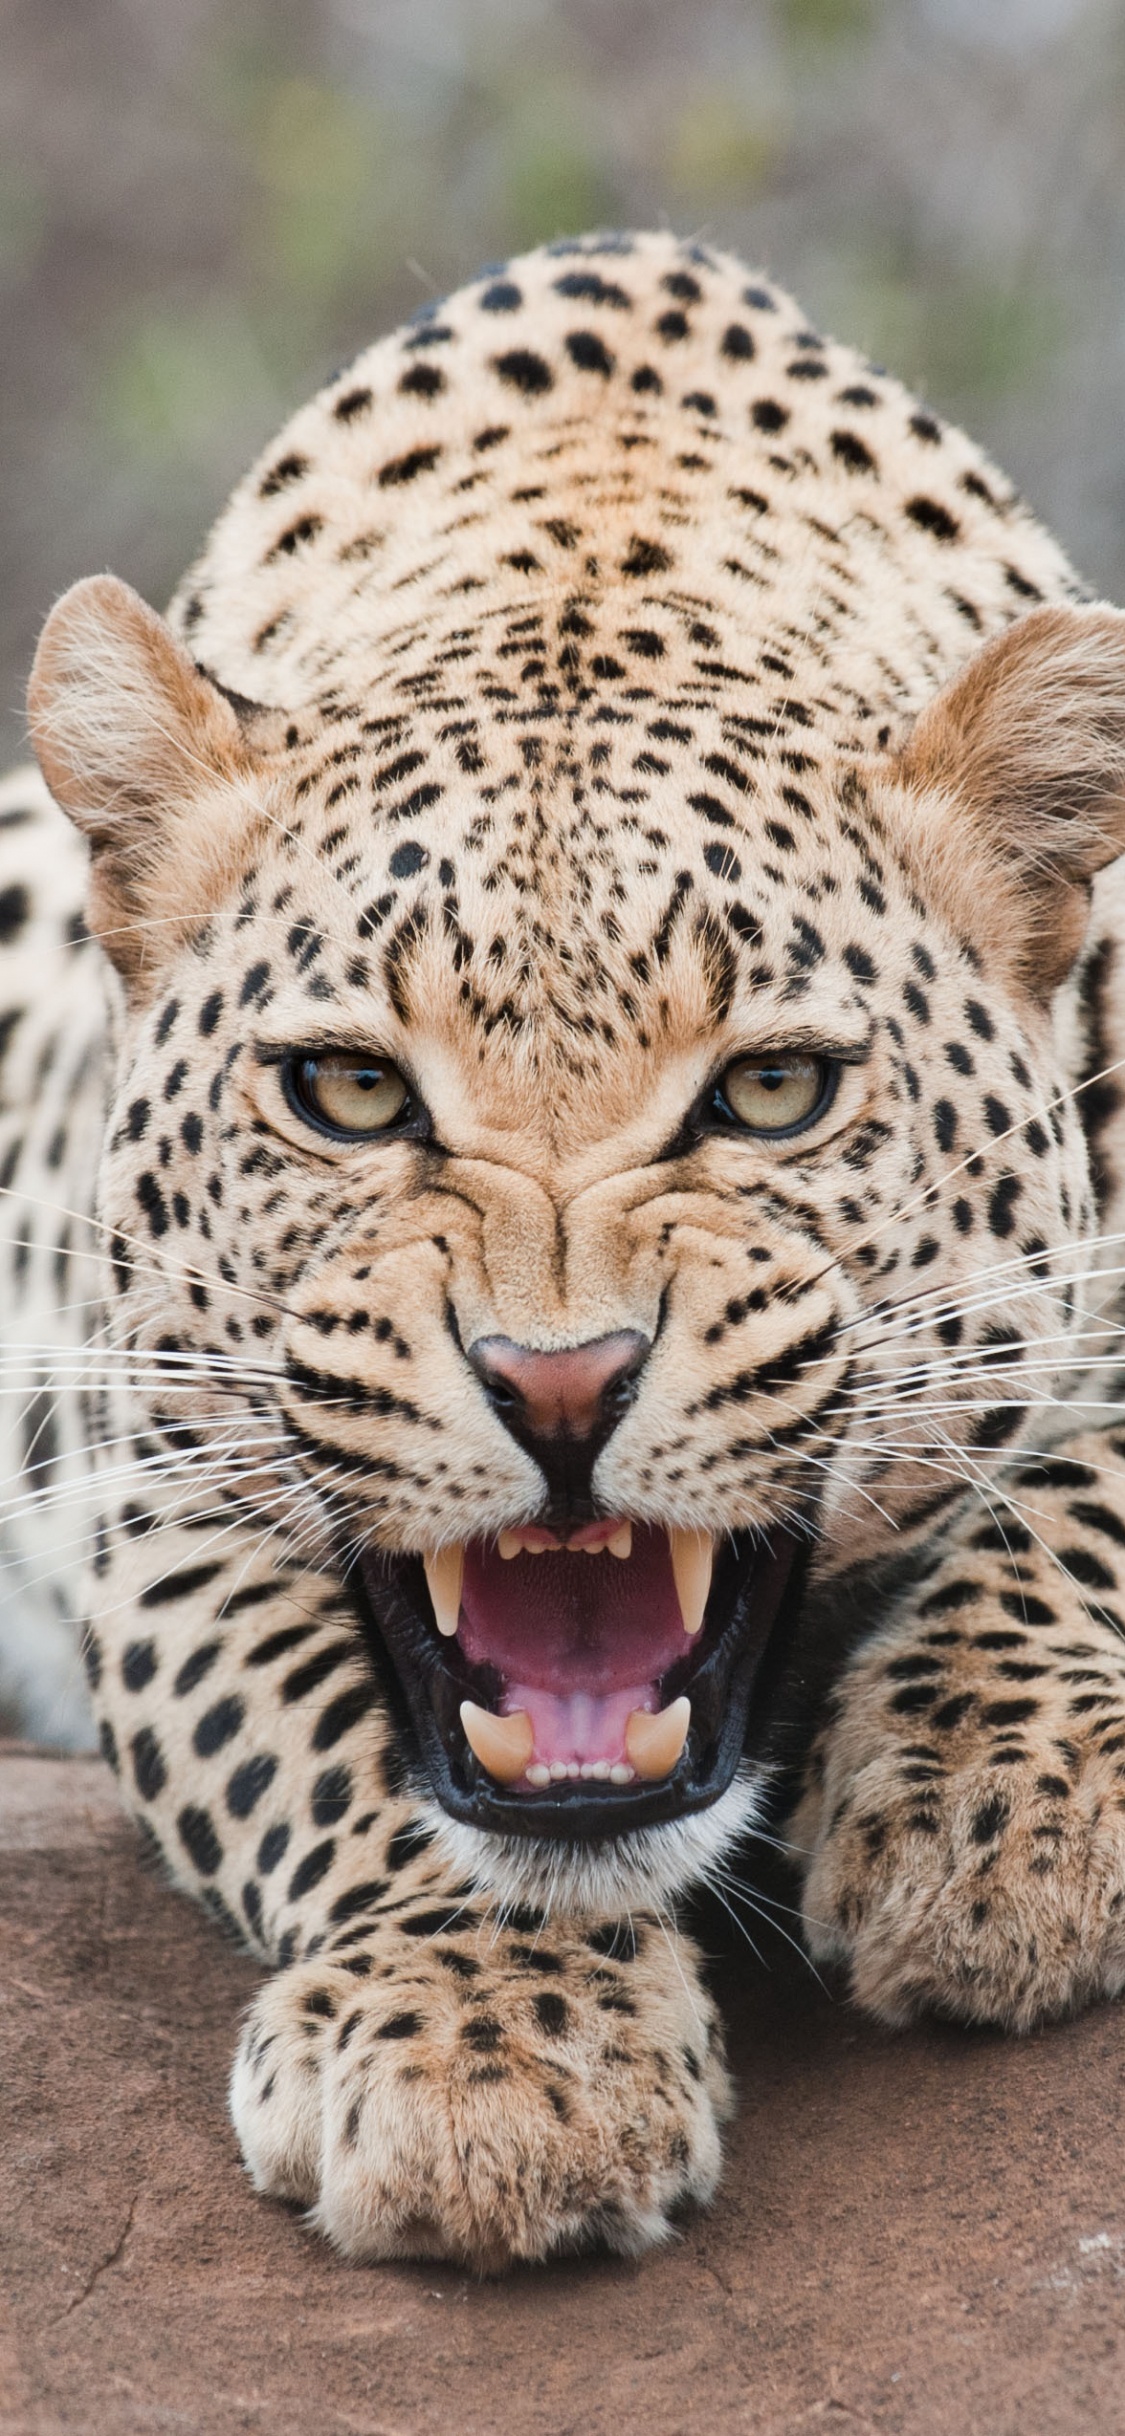 Leopard Lying on Brown Rock During Daytime. Wallpaper in 1125x2436 Resolution